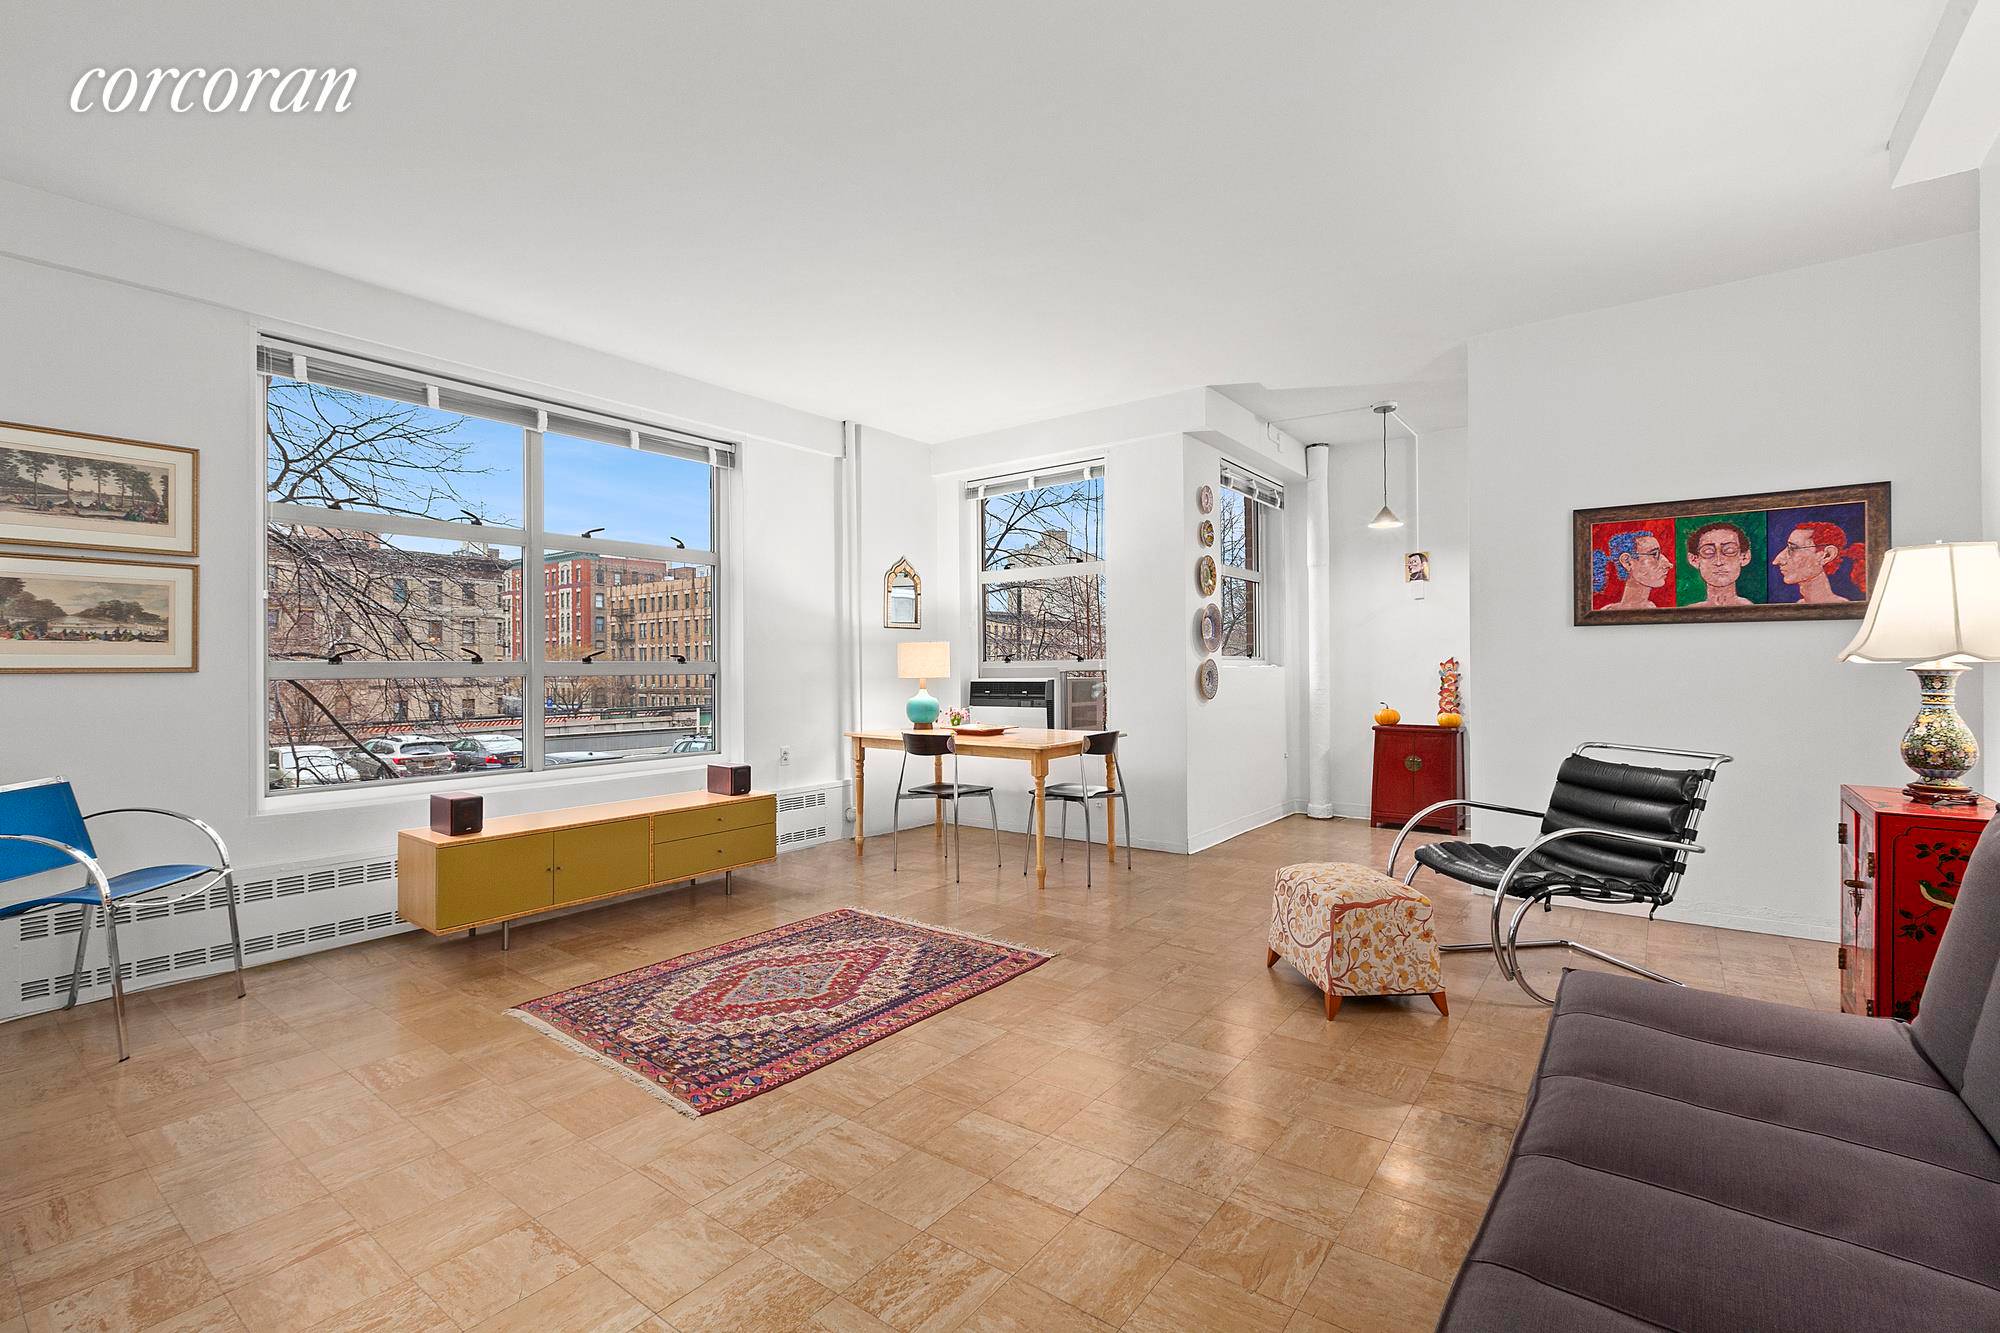 Beautifully renovated bring your toothbrush two Bedroom for sale, located in an oasis of Morningside Heights appropriately called Morningside Gardens.